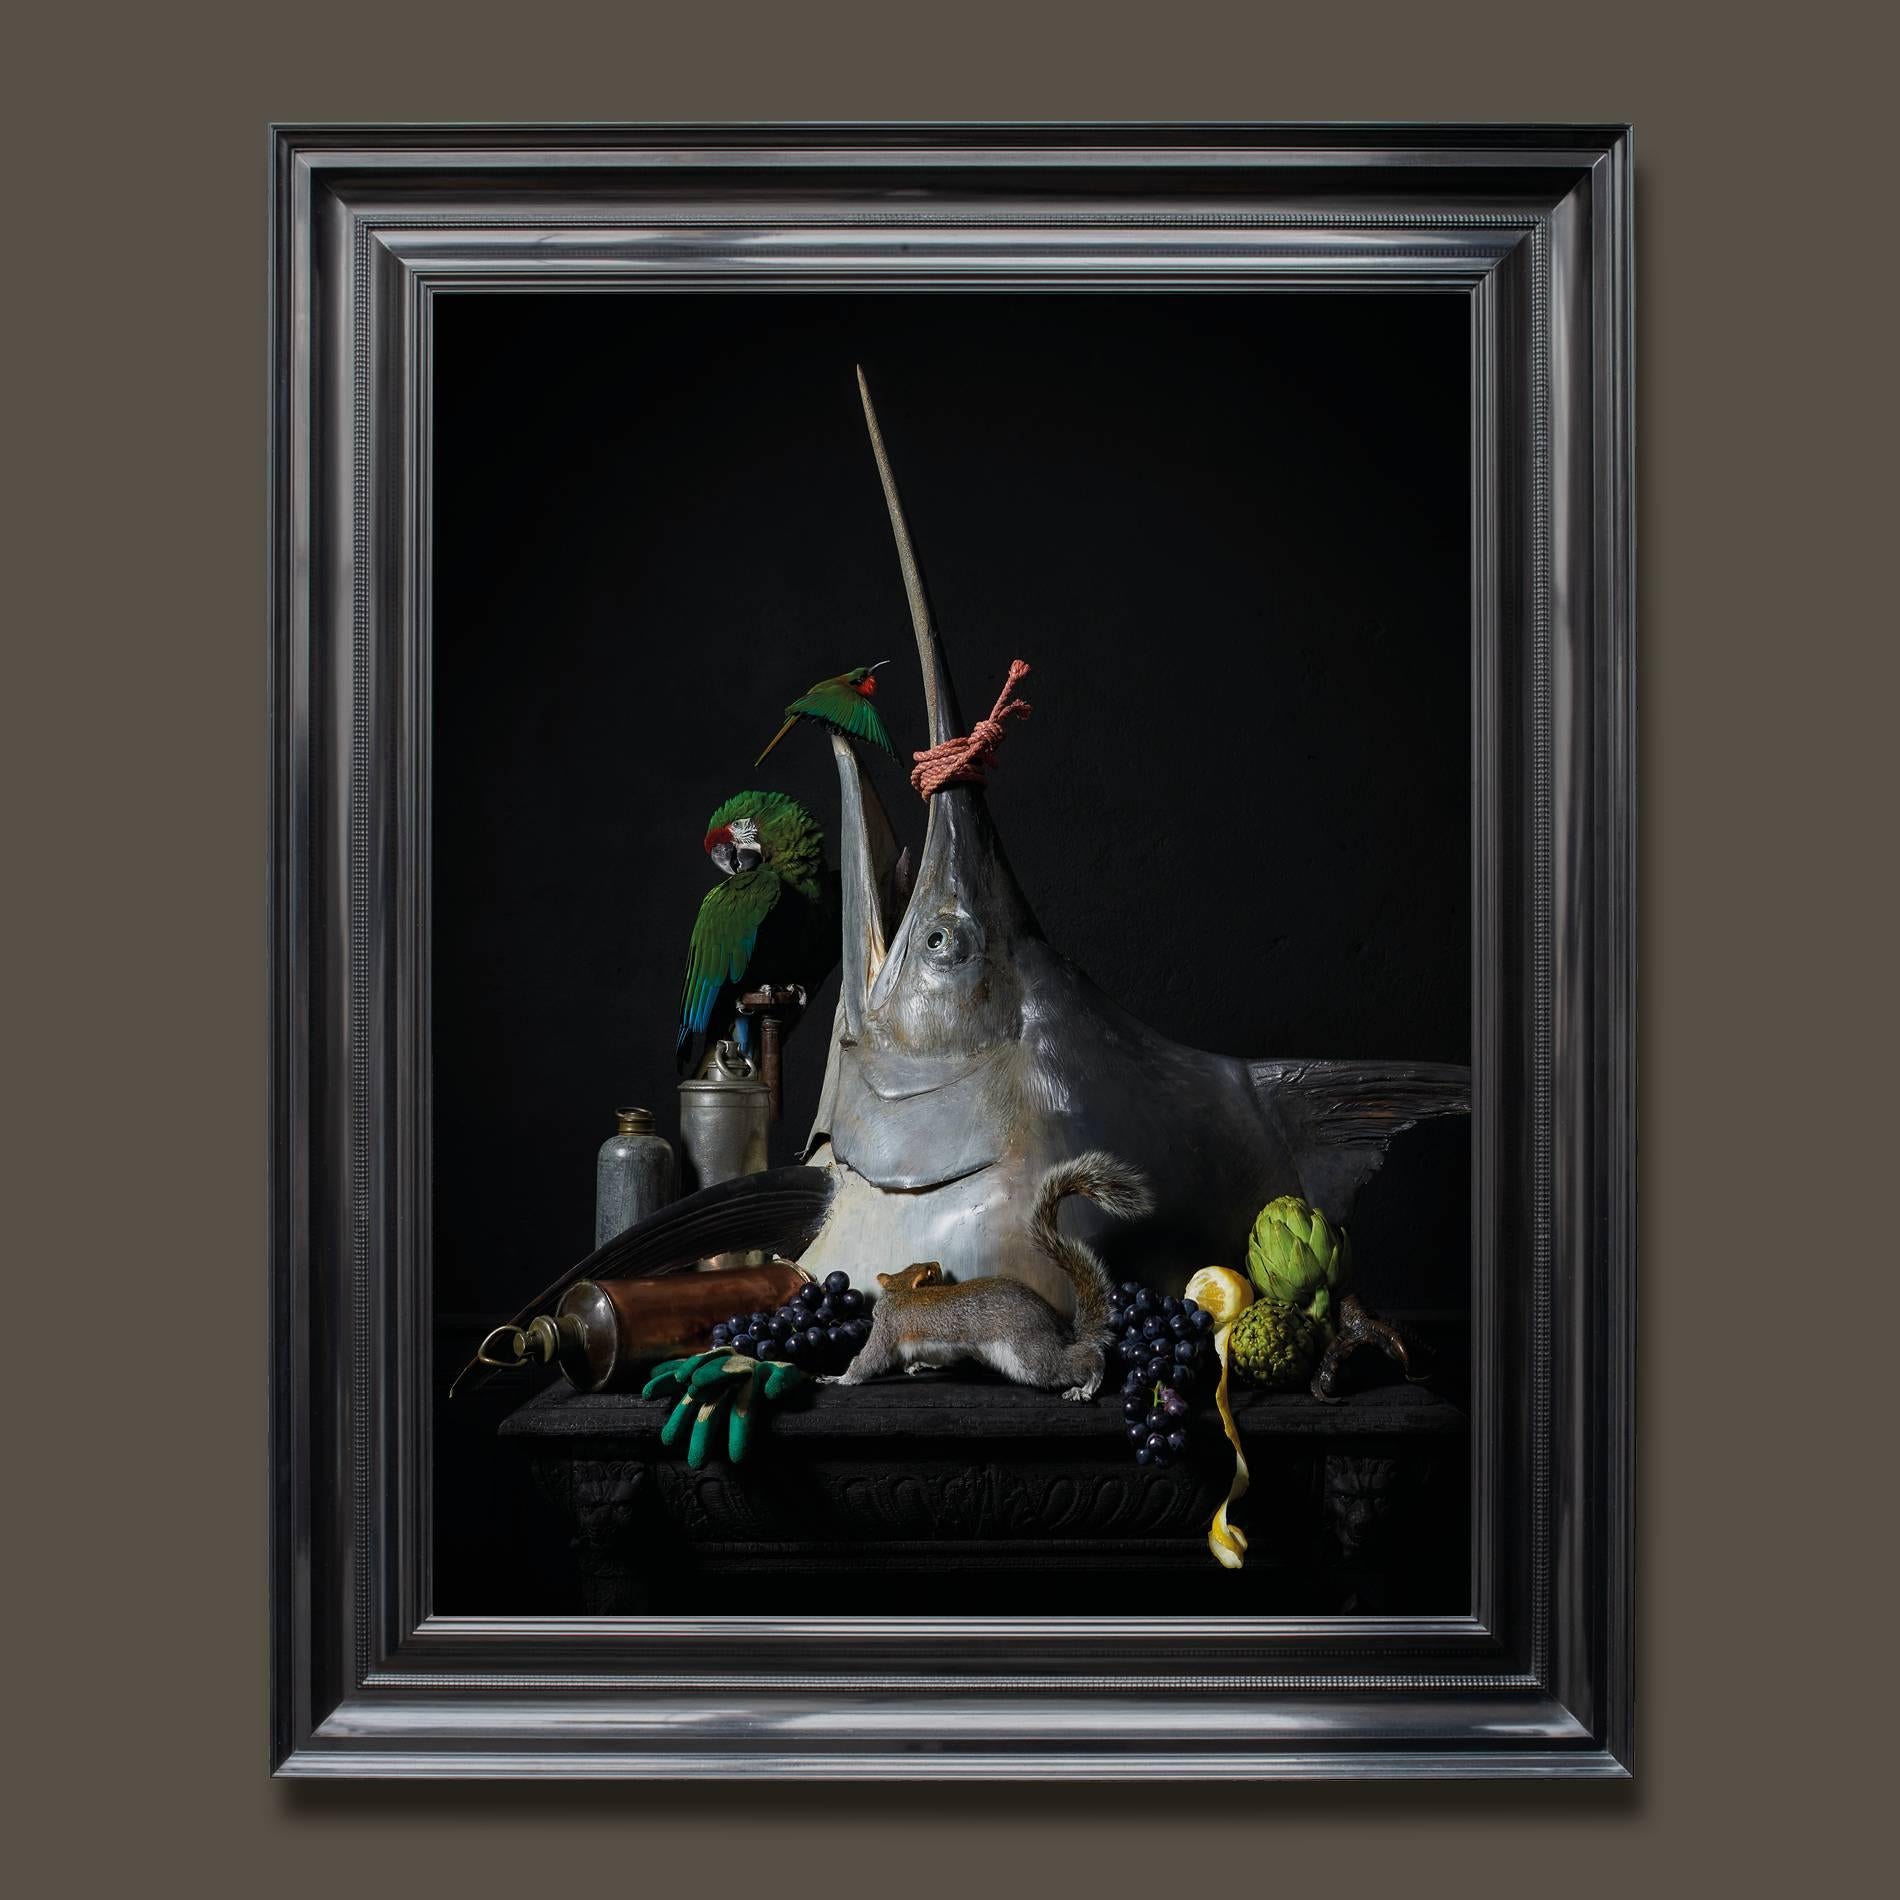 The third series of photographs by fine taxidermists Sinke & Van Tongeren

After observing and analysing so many 17th-century paintings, they were inspired to create a new series of work focused on still life masterpieces. They chose photography as